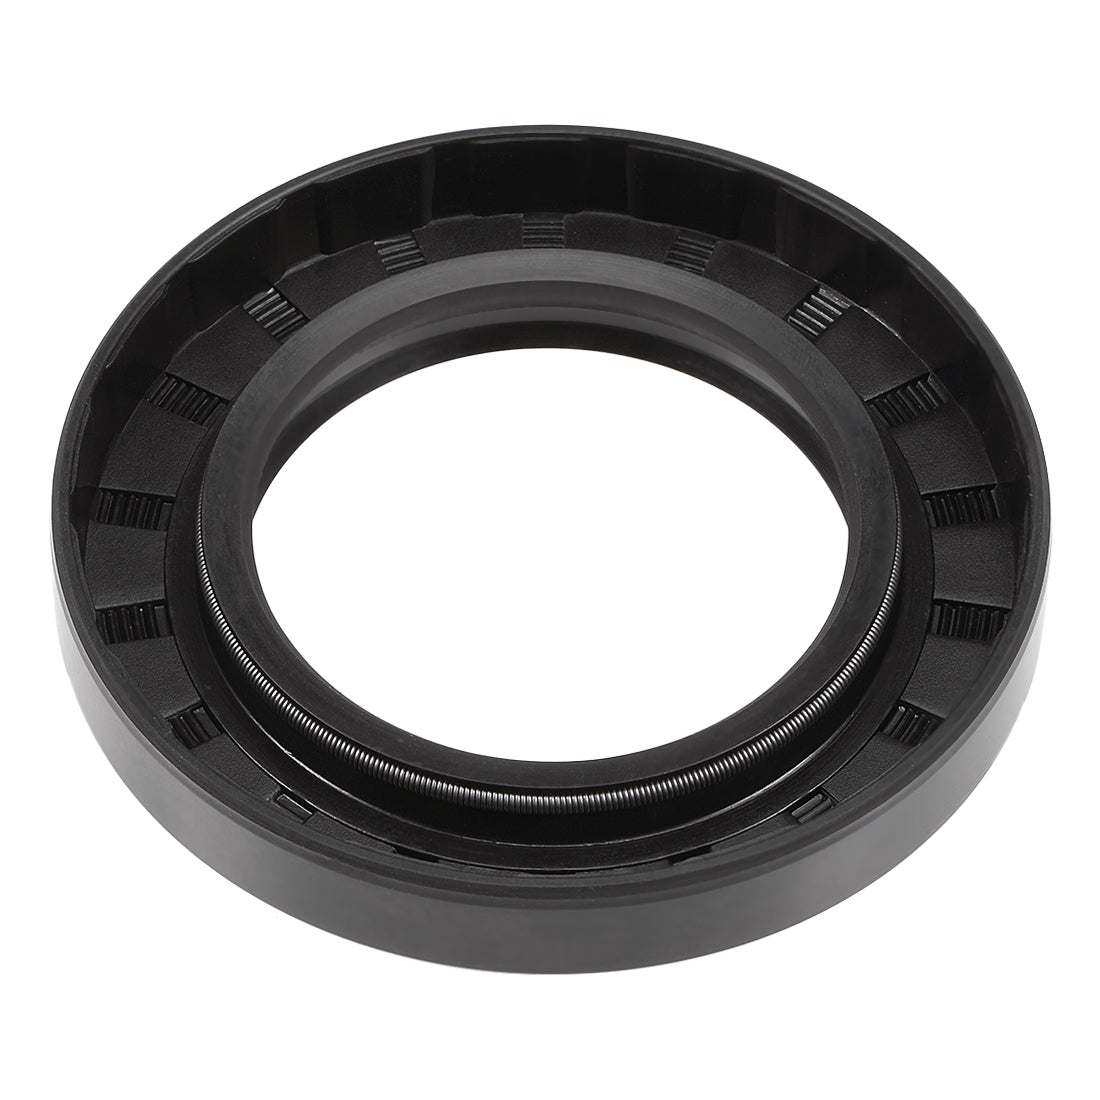 Uxcell Uxcell Oil Seal, TC 50mm x 80mm x 12mm, Nitrile Rubber Cover Double Lip